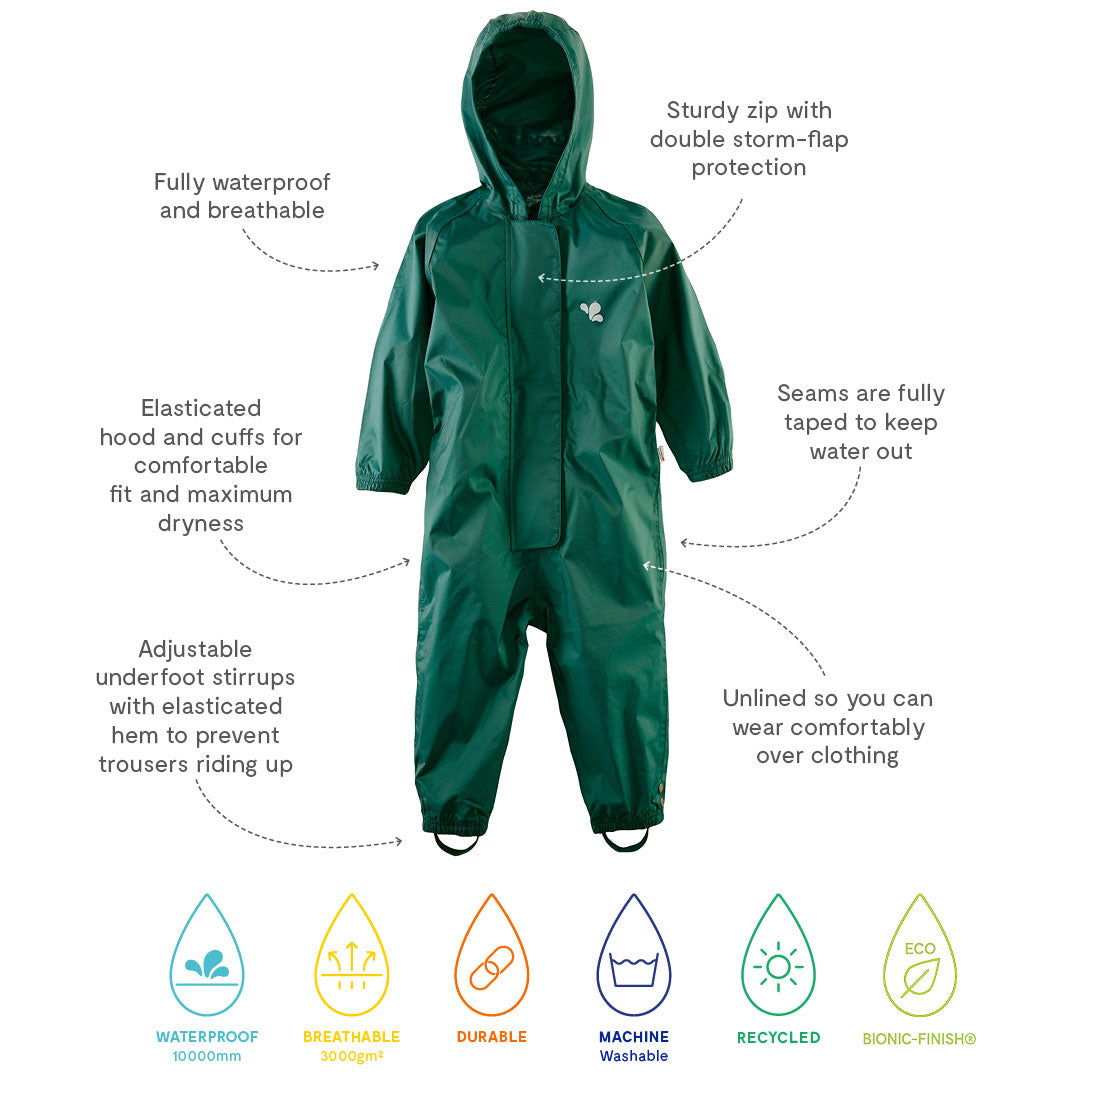 Originals Waterproof Recycled Puddle Suit Green